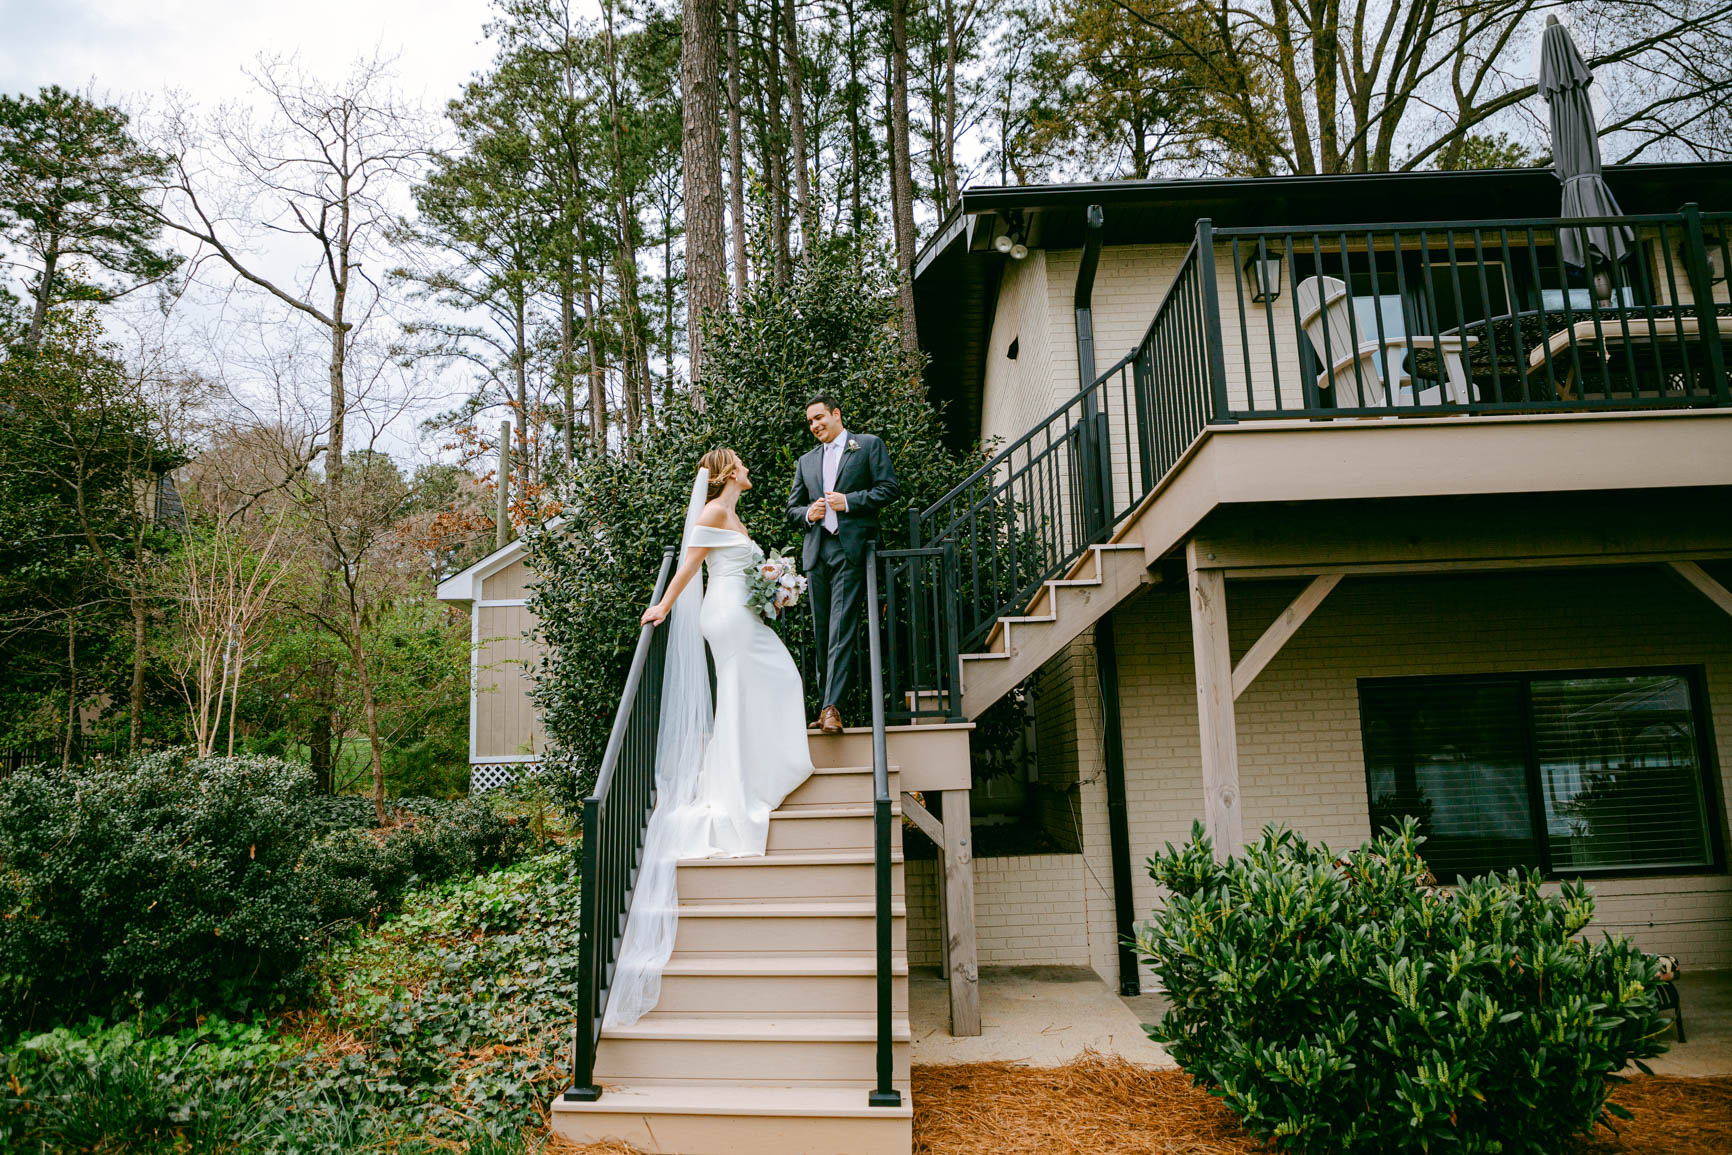 lake house elopement portraits session in Mooresville, NC shot by Nhieu Tang Photography | nhieutang.com